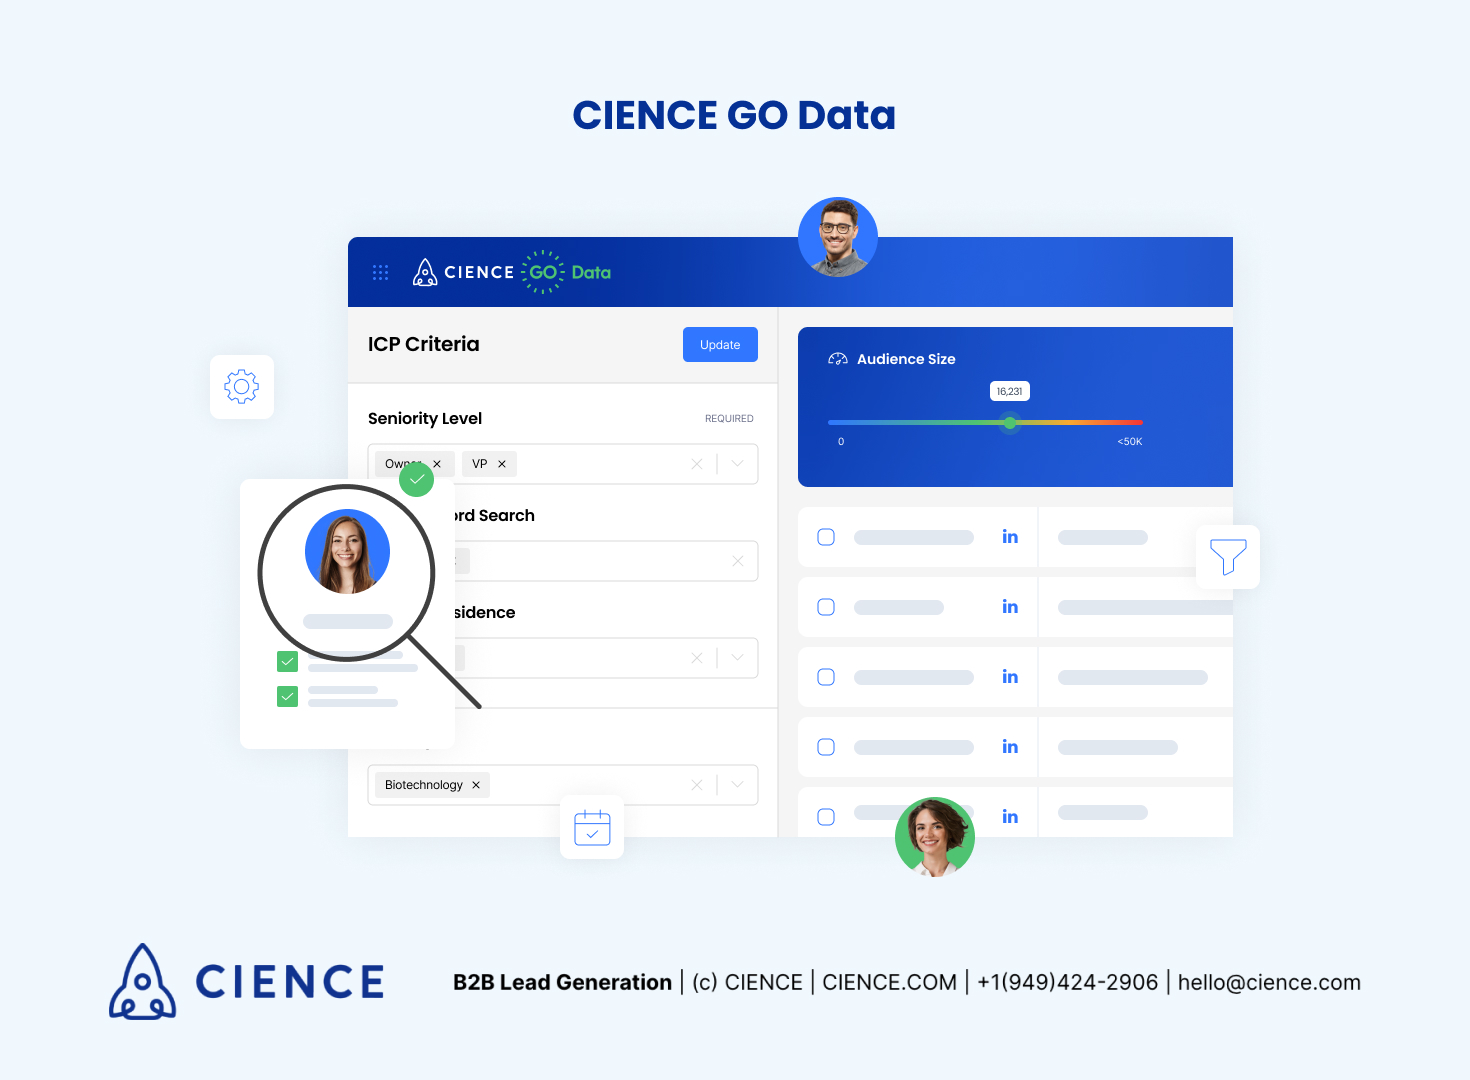 Best B2B Contact Database - CIENCE GO Data